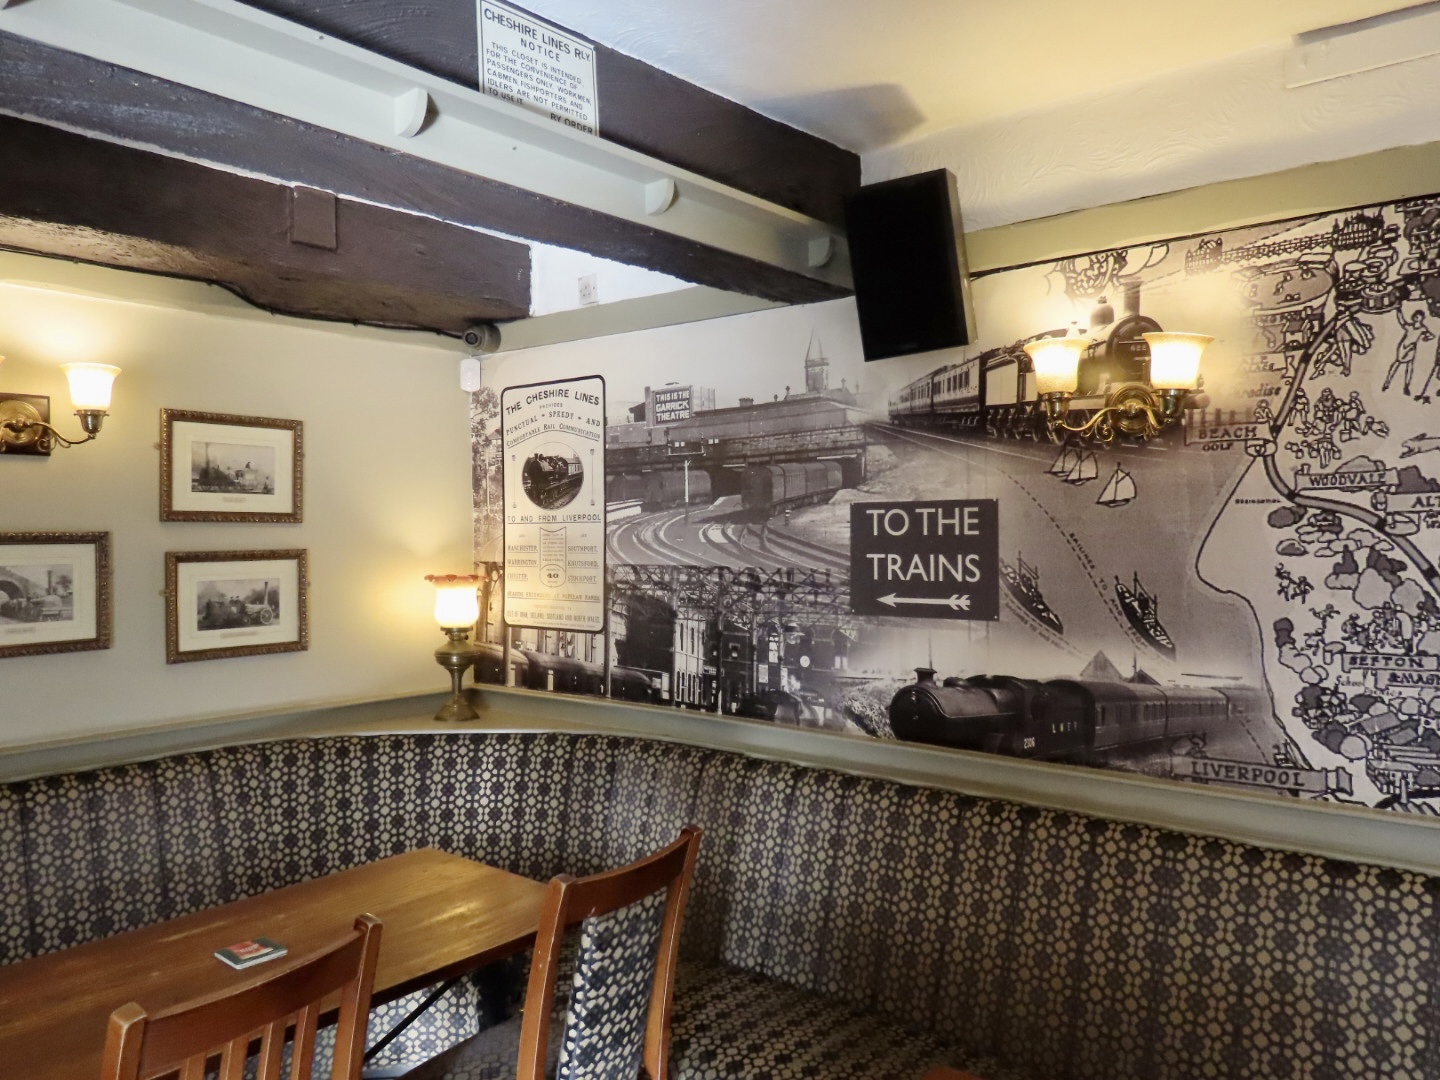 The Cheshire Lines pub in Southport. Photo by Andrew Brown Media